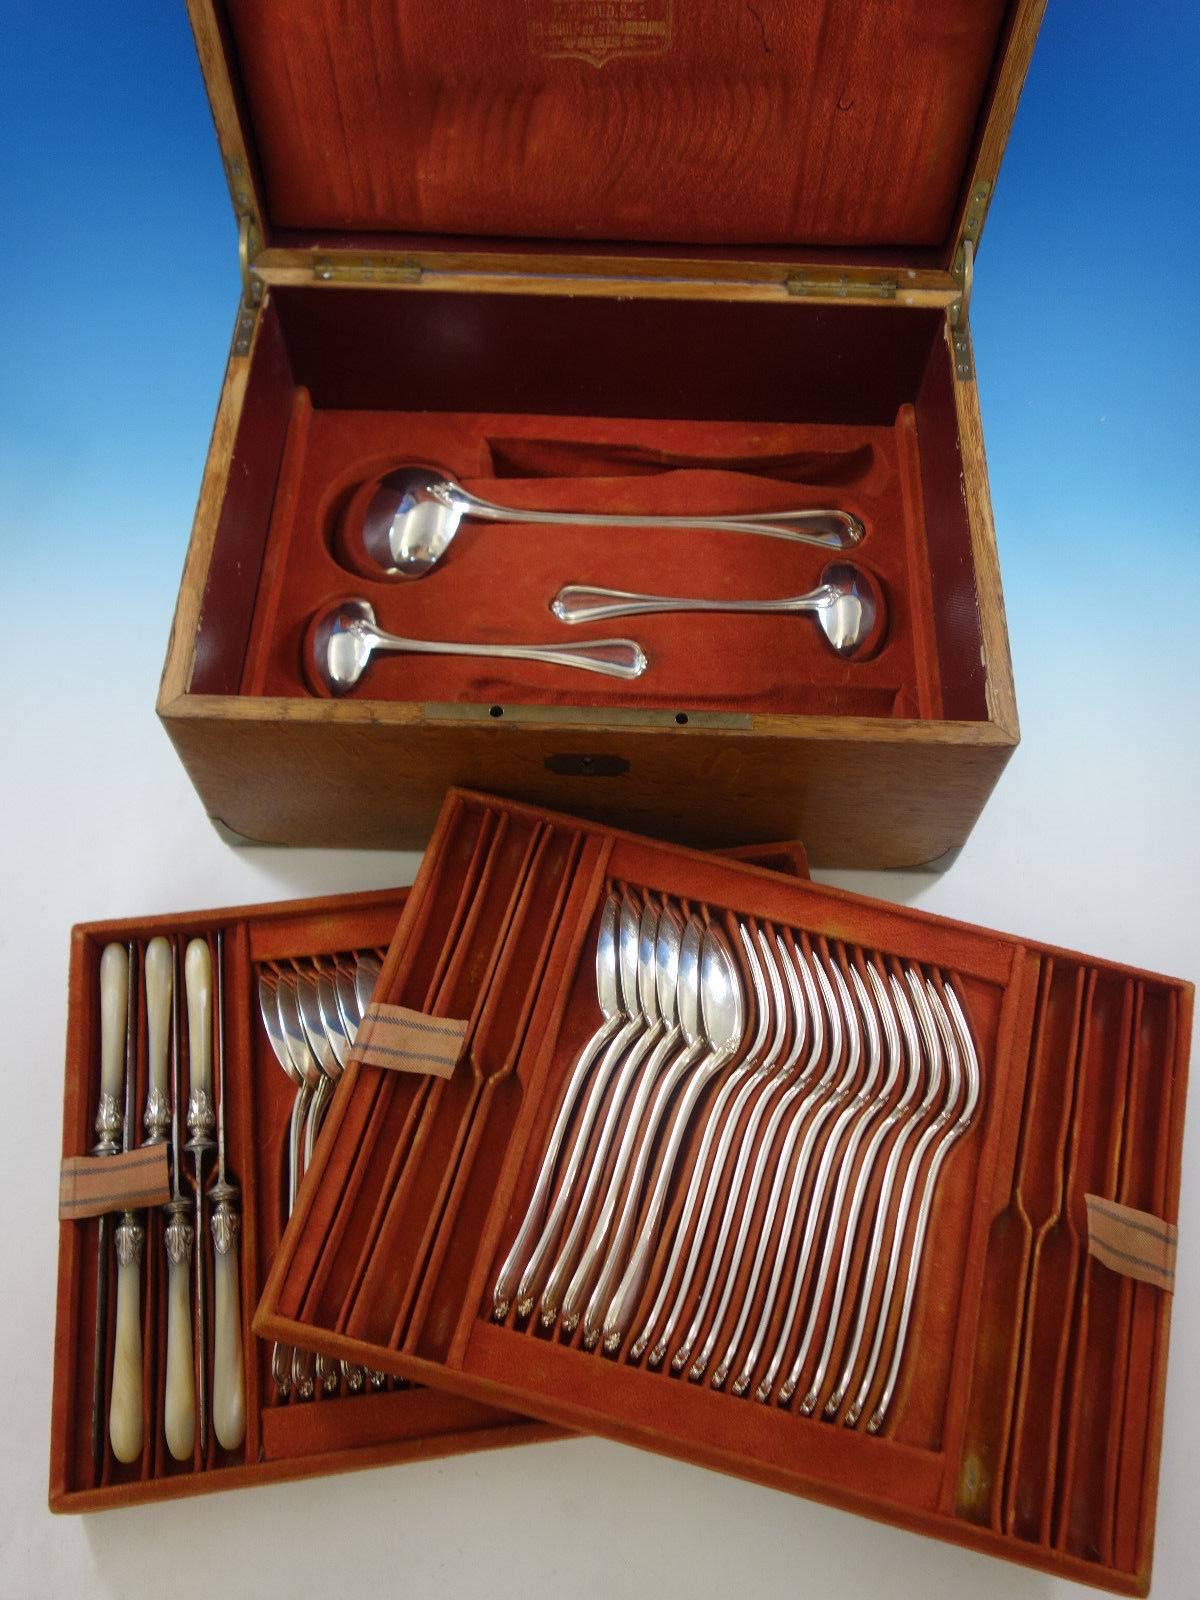 French sterling silver flatware set by Francois Nicoud in Fitted box, circa 1870, 51 pieces. This set includes: 

12 mother-of-pearl handle dinner knives, 10